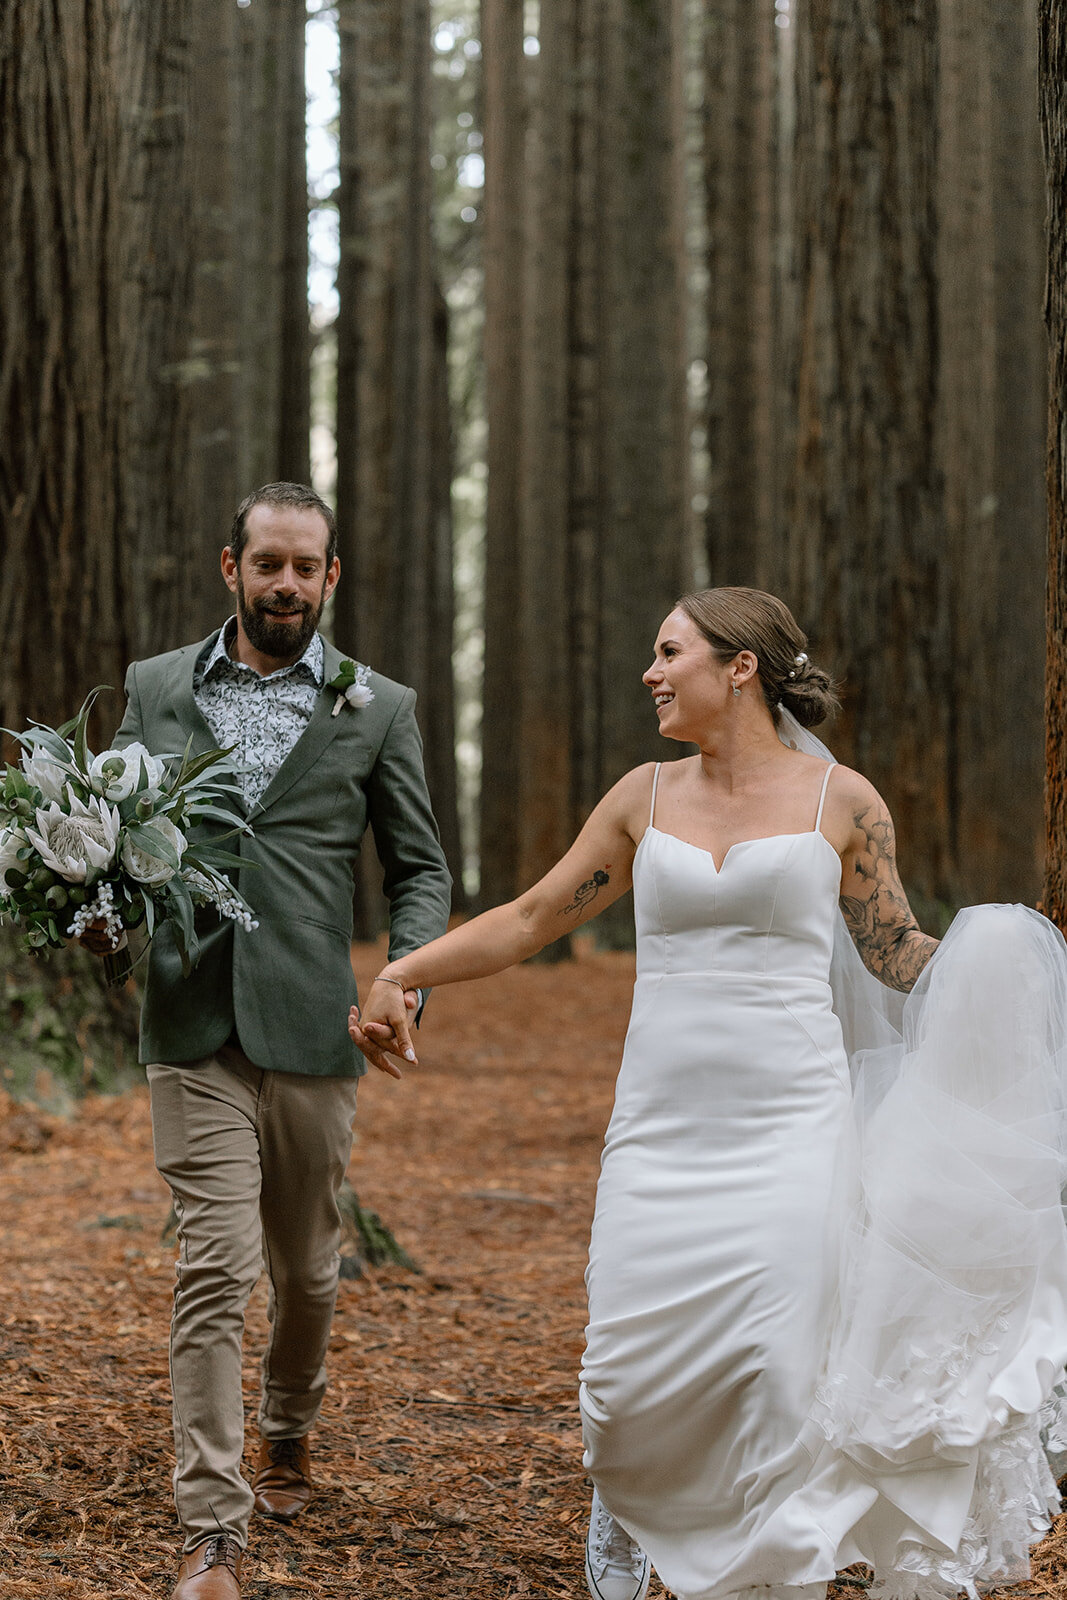 Stacey&Cory-Coast&Pines-379